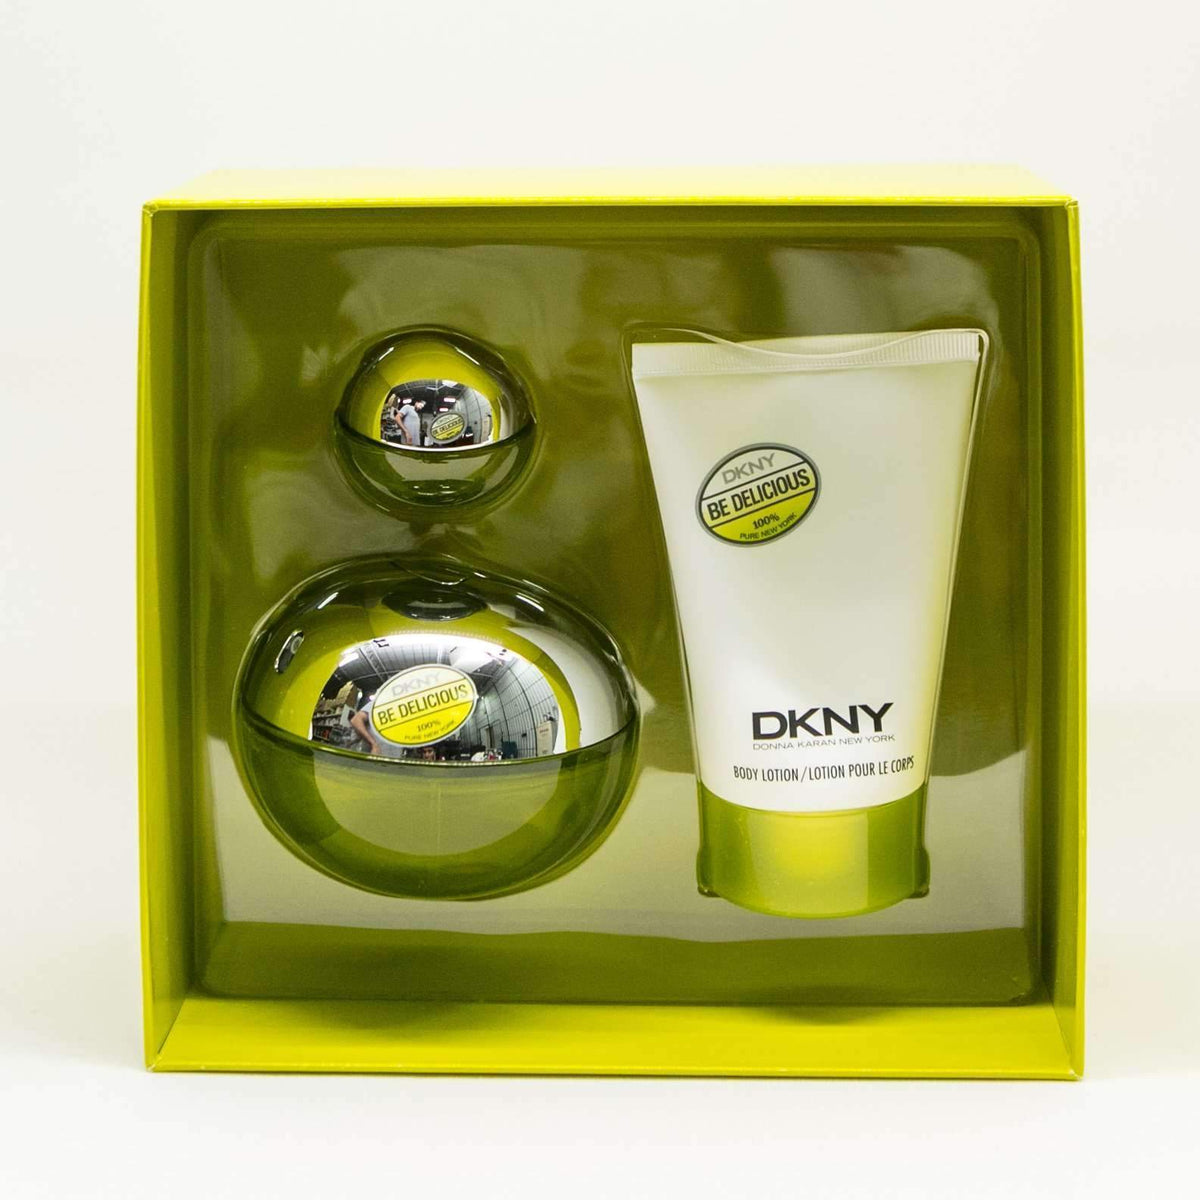 Buy Fragrance and Perfume Online from Canada No 1 Perfume for DKNY Delicious Gift Set By Donna Karen For Women Colognes Perfumes – Brand Name Perfumes Inc.